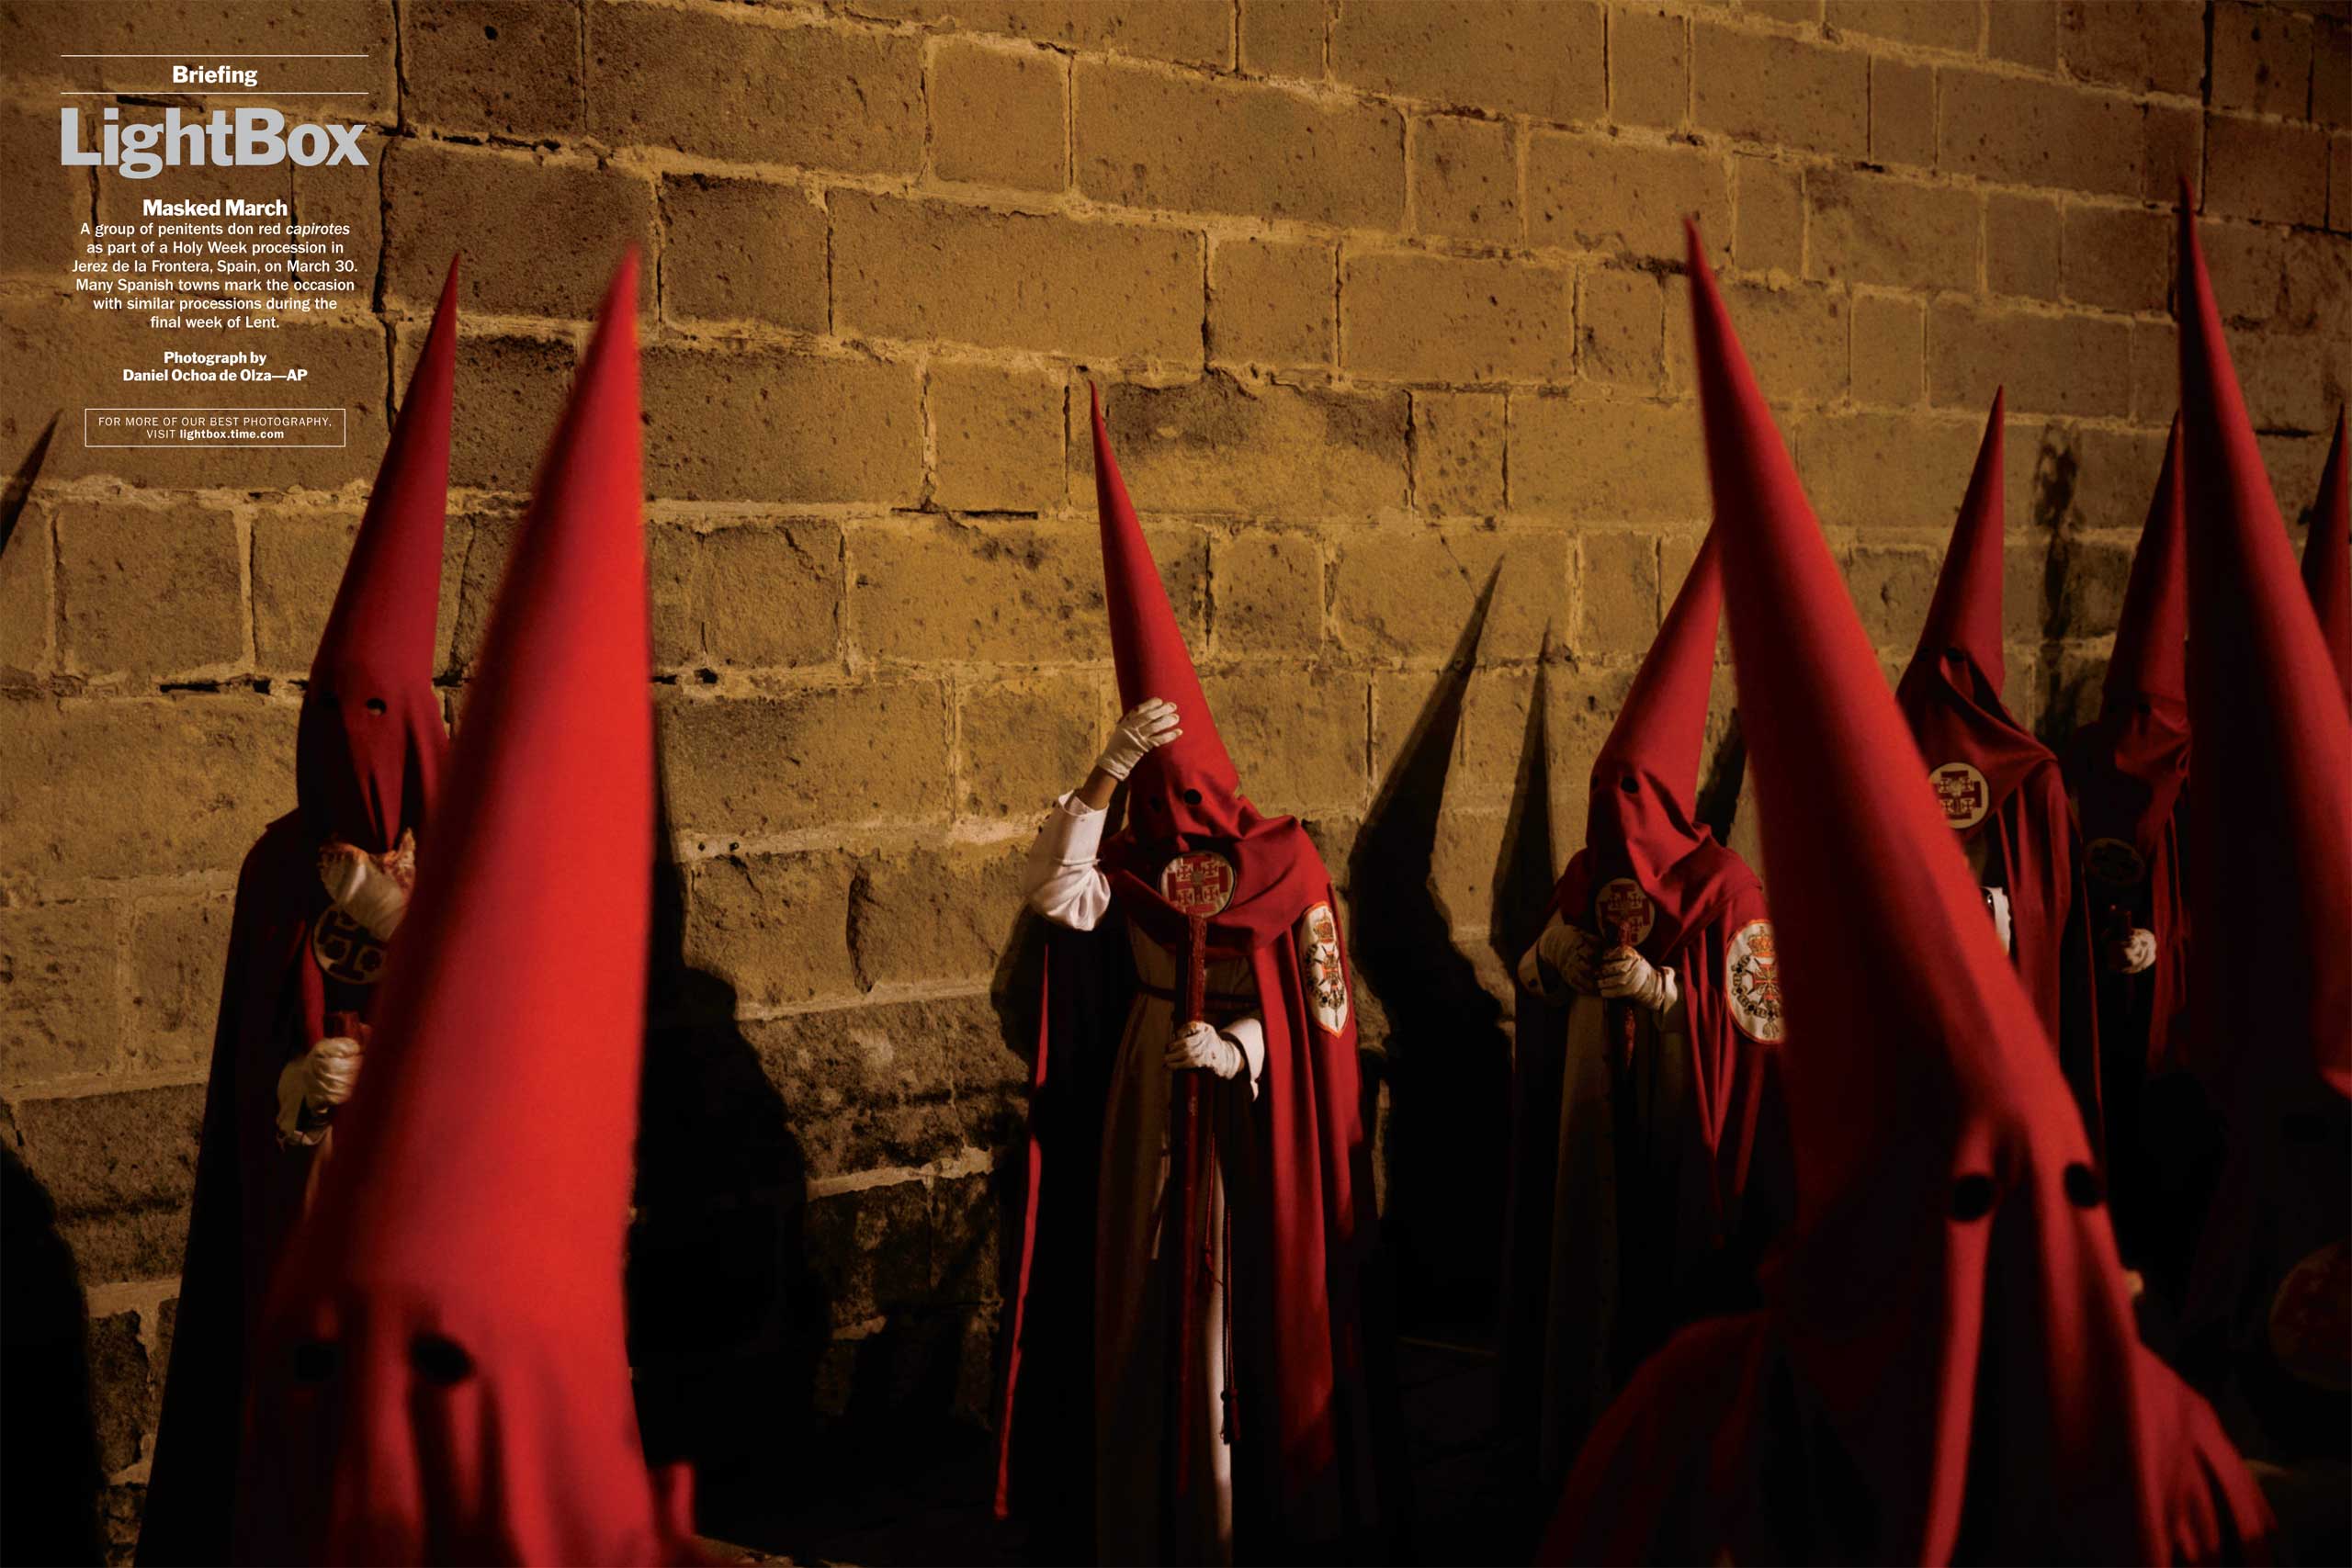 Photograph by Daniel Ochoa de Olza—APA group of penitents don red capirotes as part of a Holy Week procession in Jerez de la Frontera, Spain, on March 30. Many Spanish towns mark the occasion with similar processions during the final week of Lent. (TIME issue April 13, 2015)